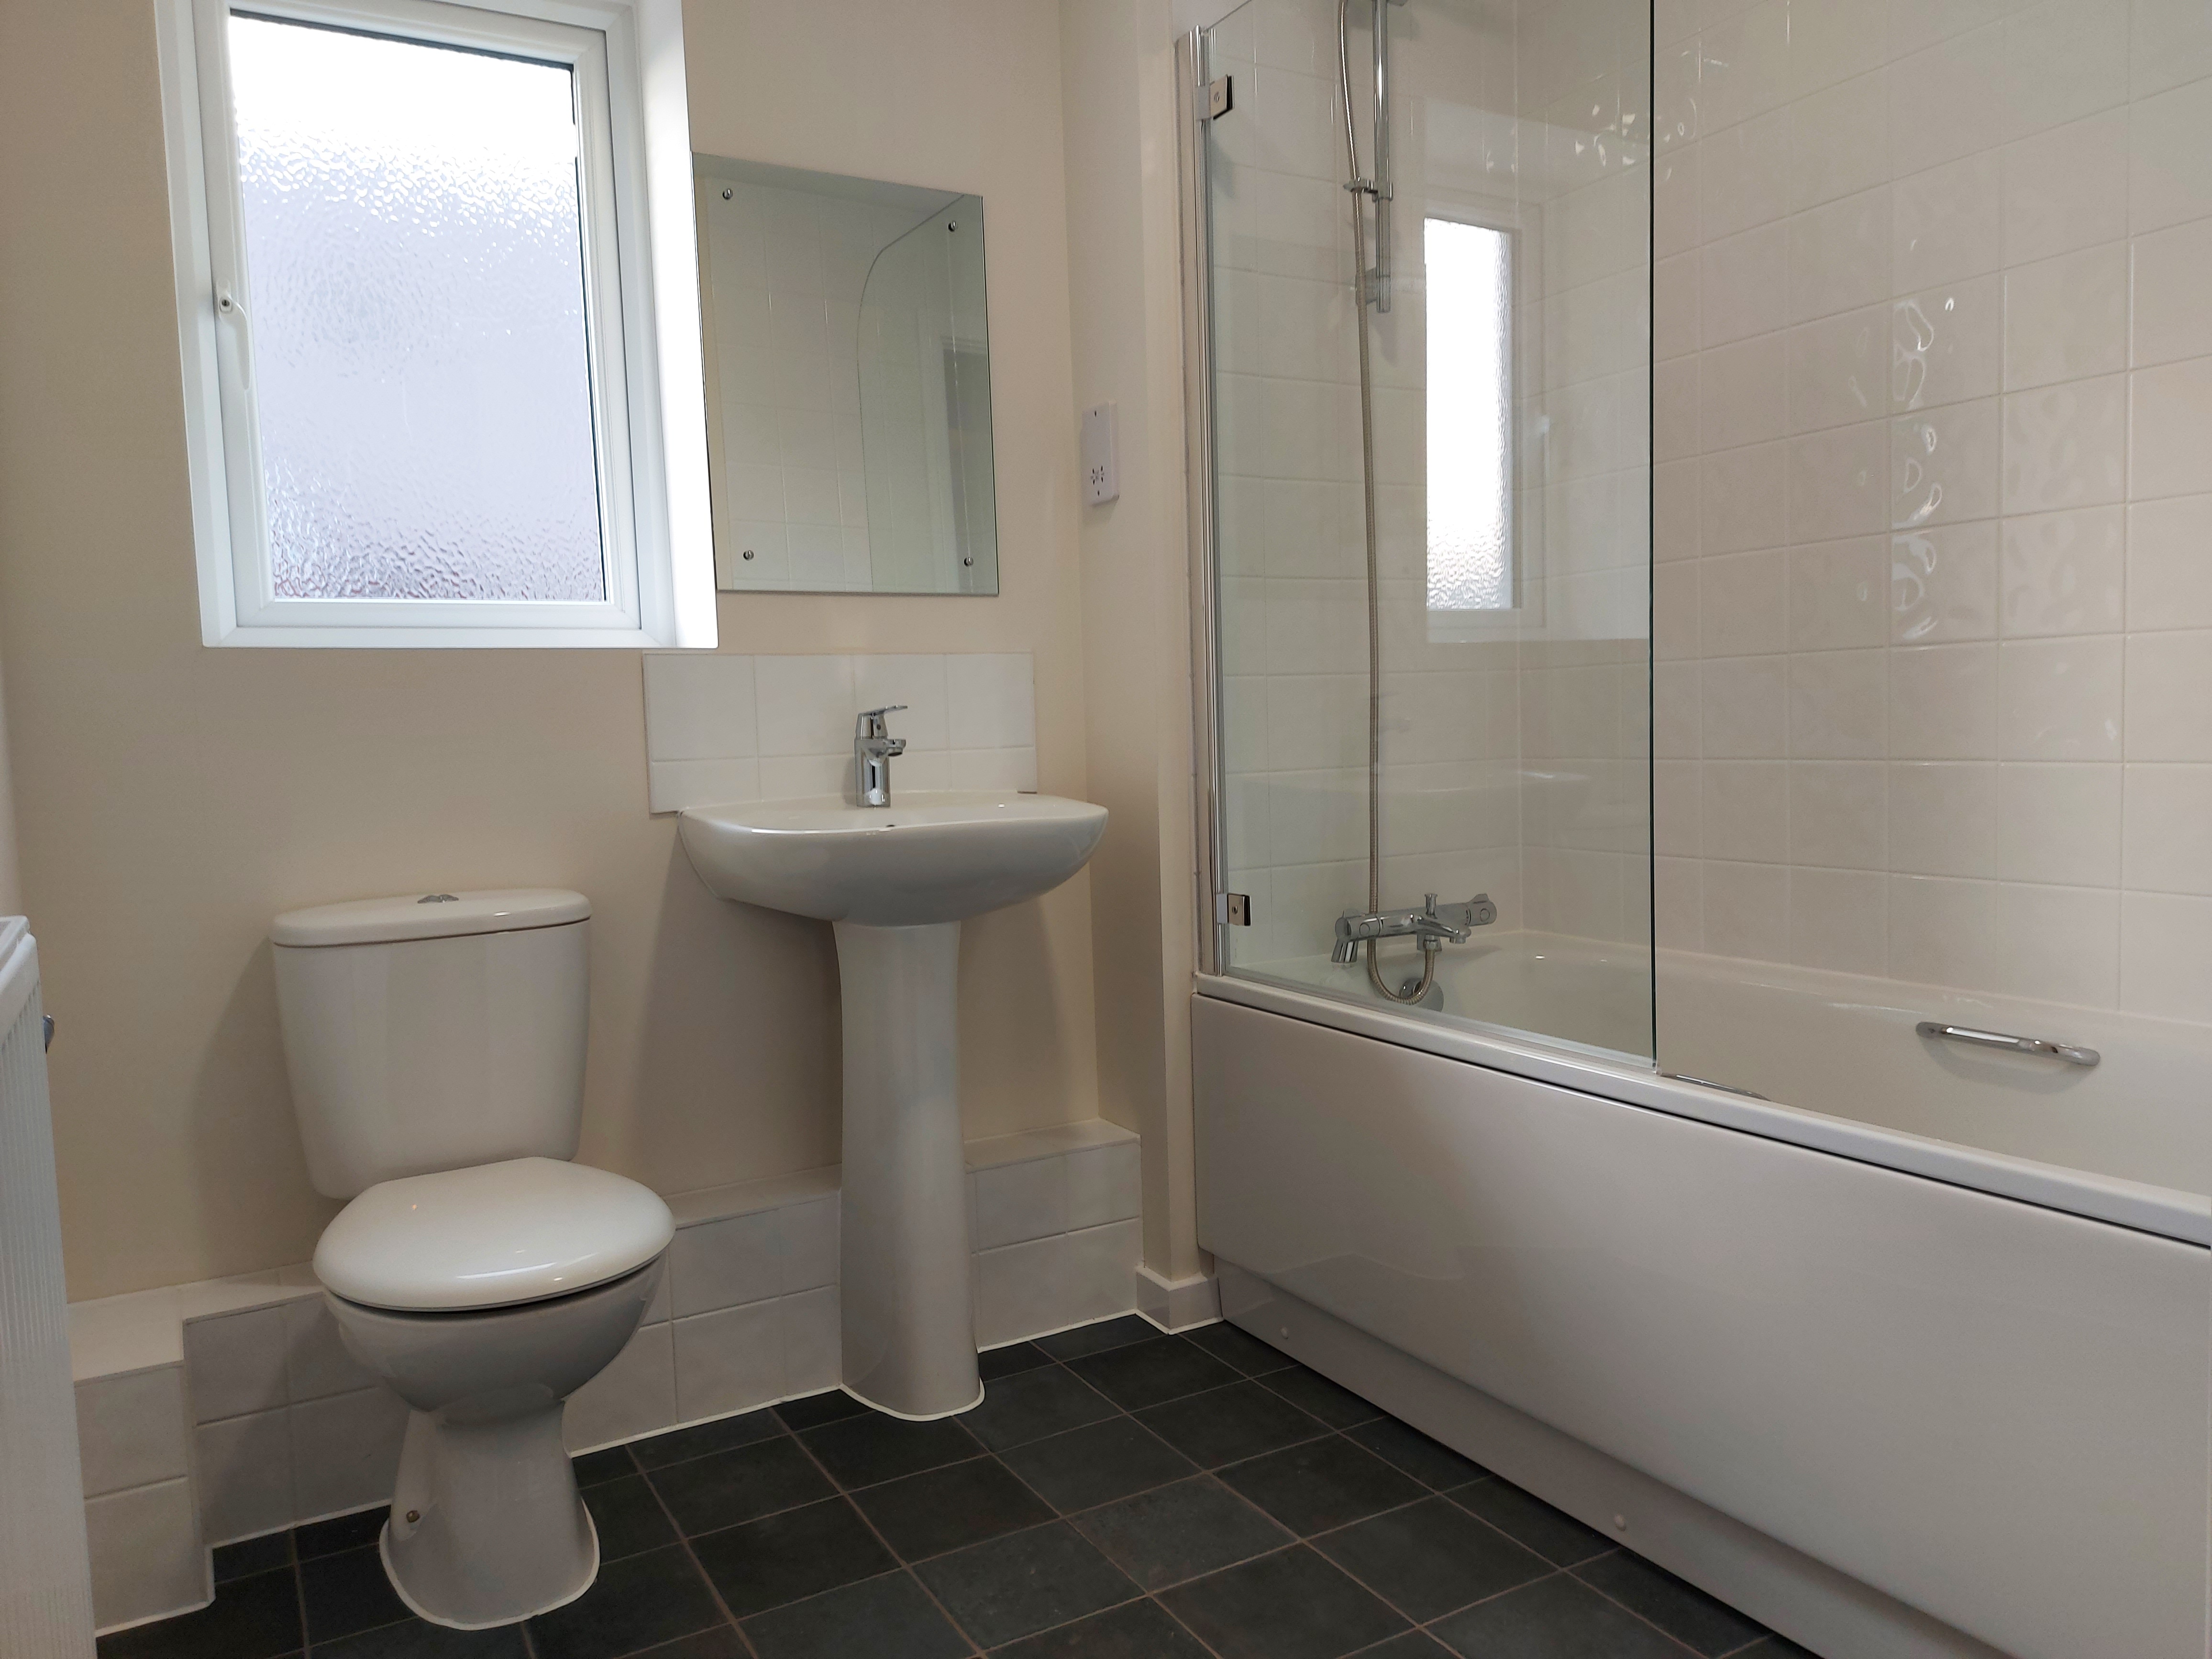 Photo of a Bathroom at a Shared Ownership property at Windmill Place in Ash